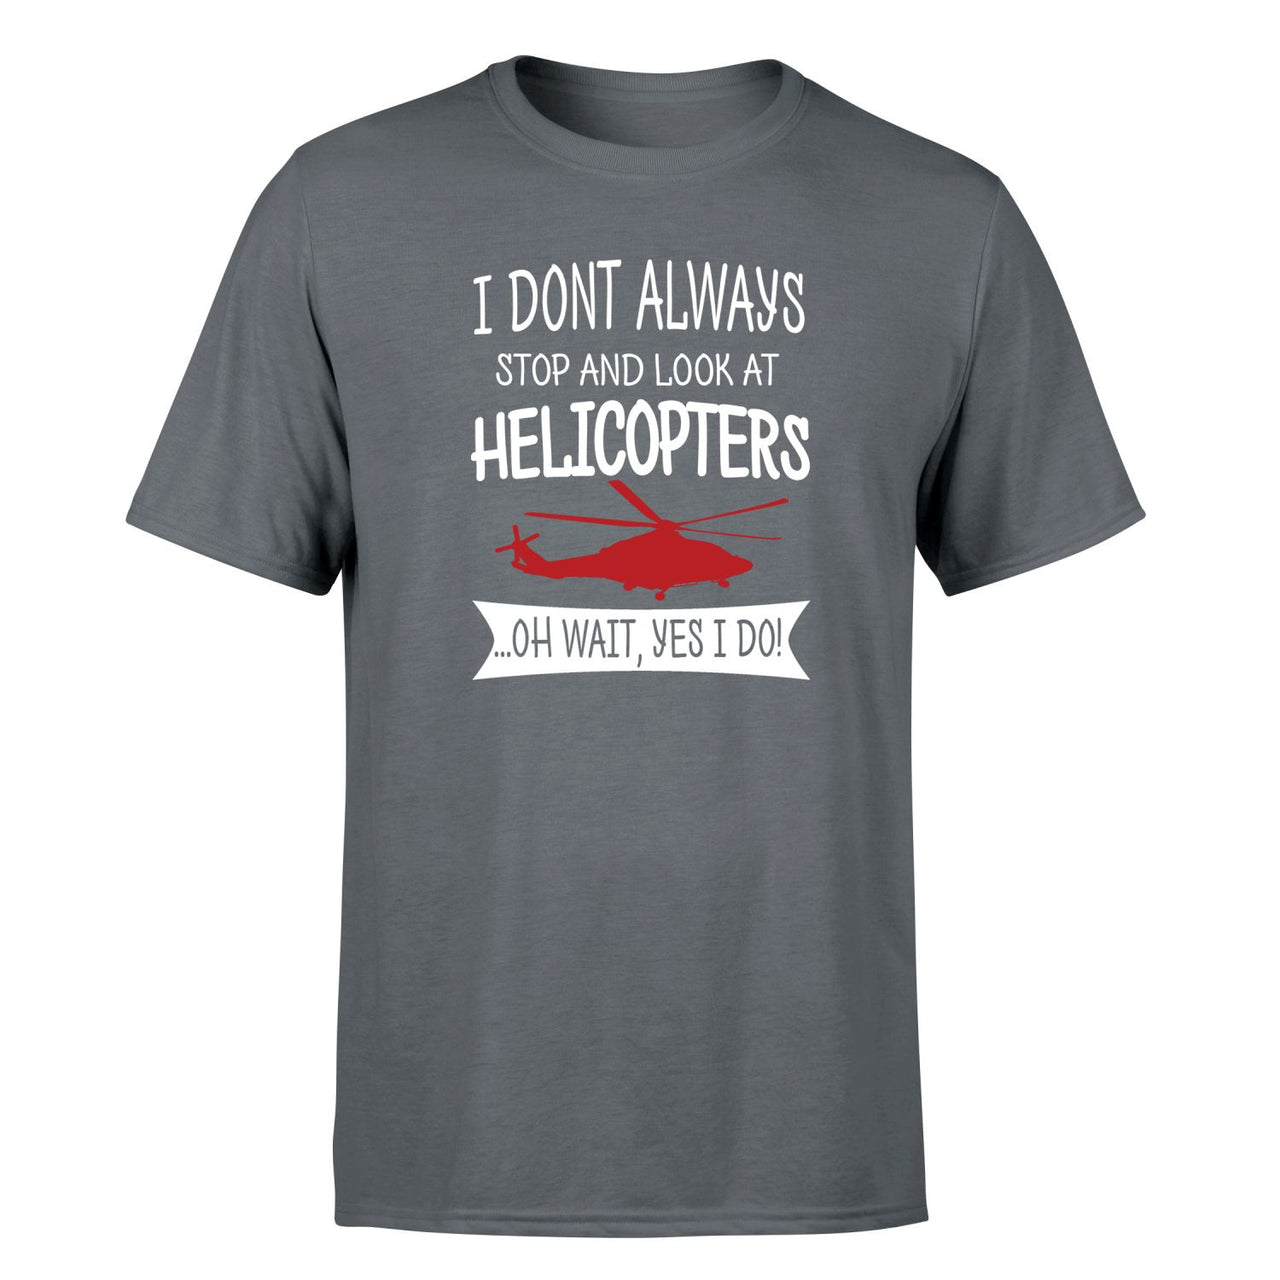 I Don't Always Stop and Look at Helicopters Designed T-Shirts